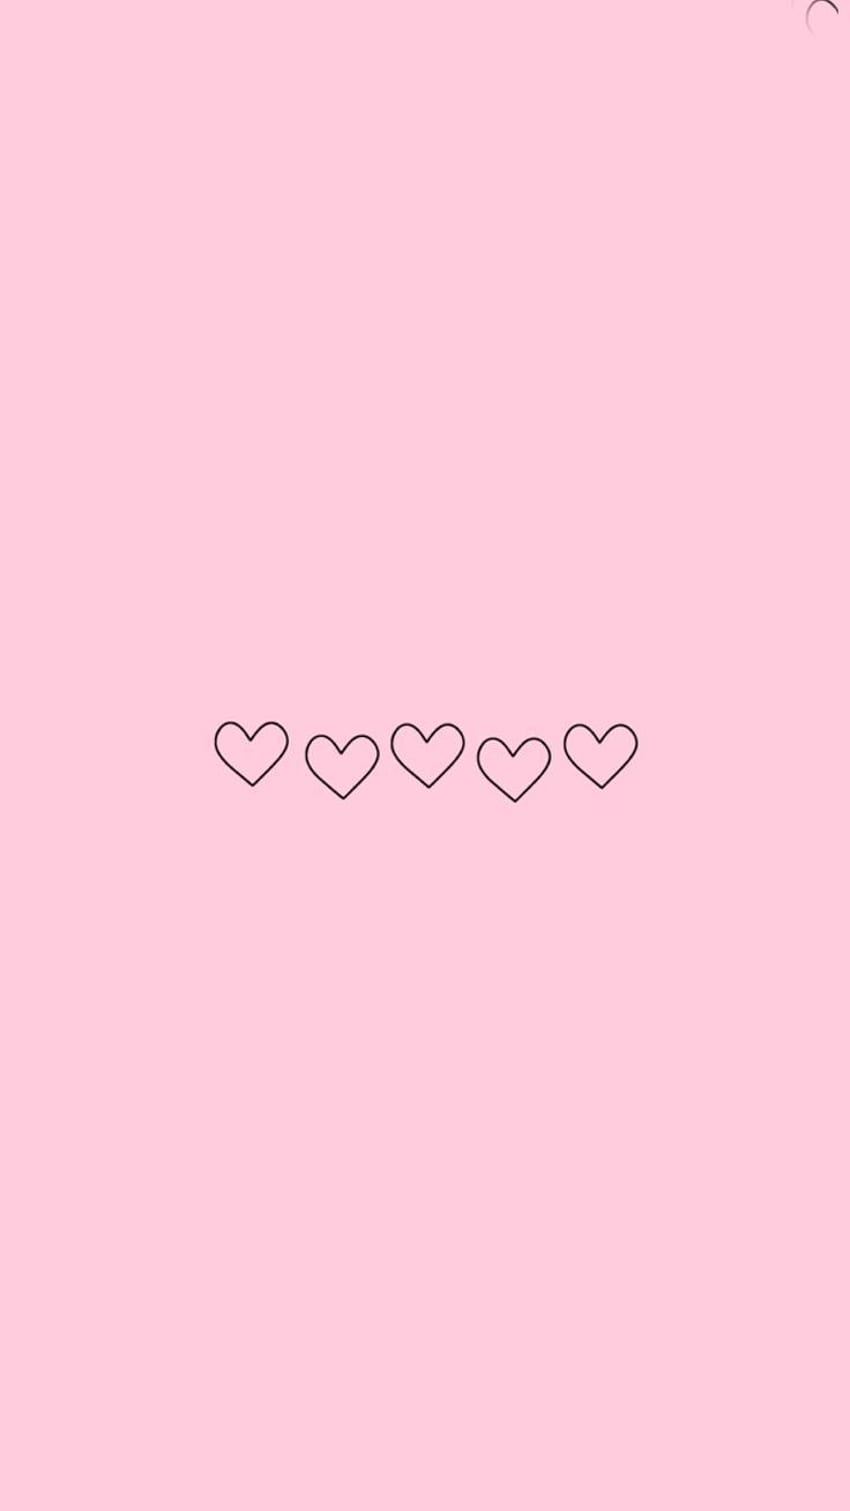 A heart on pink background - Pastel pink